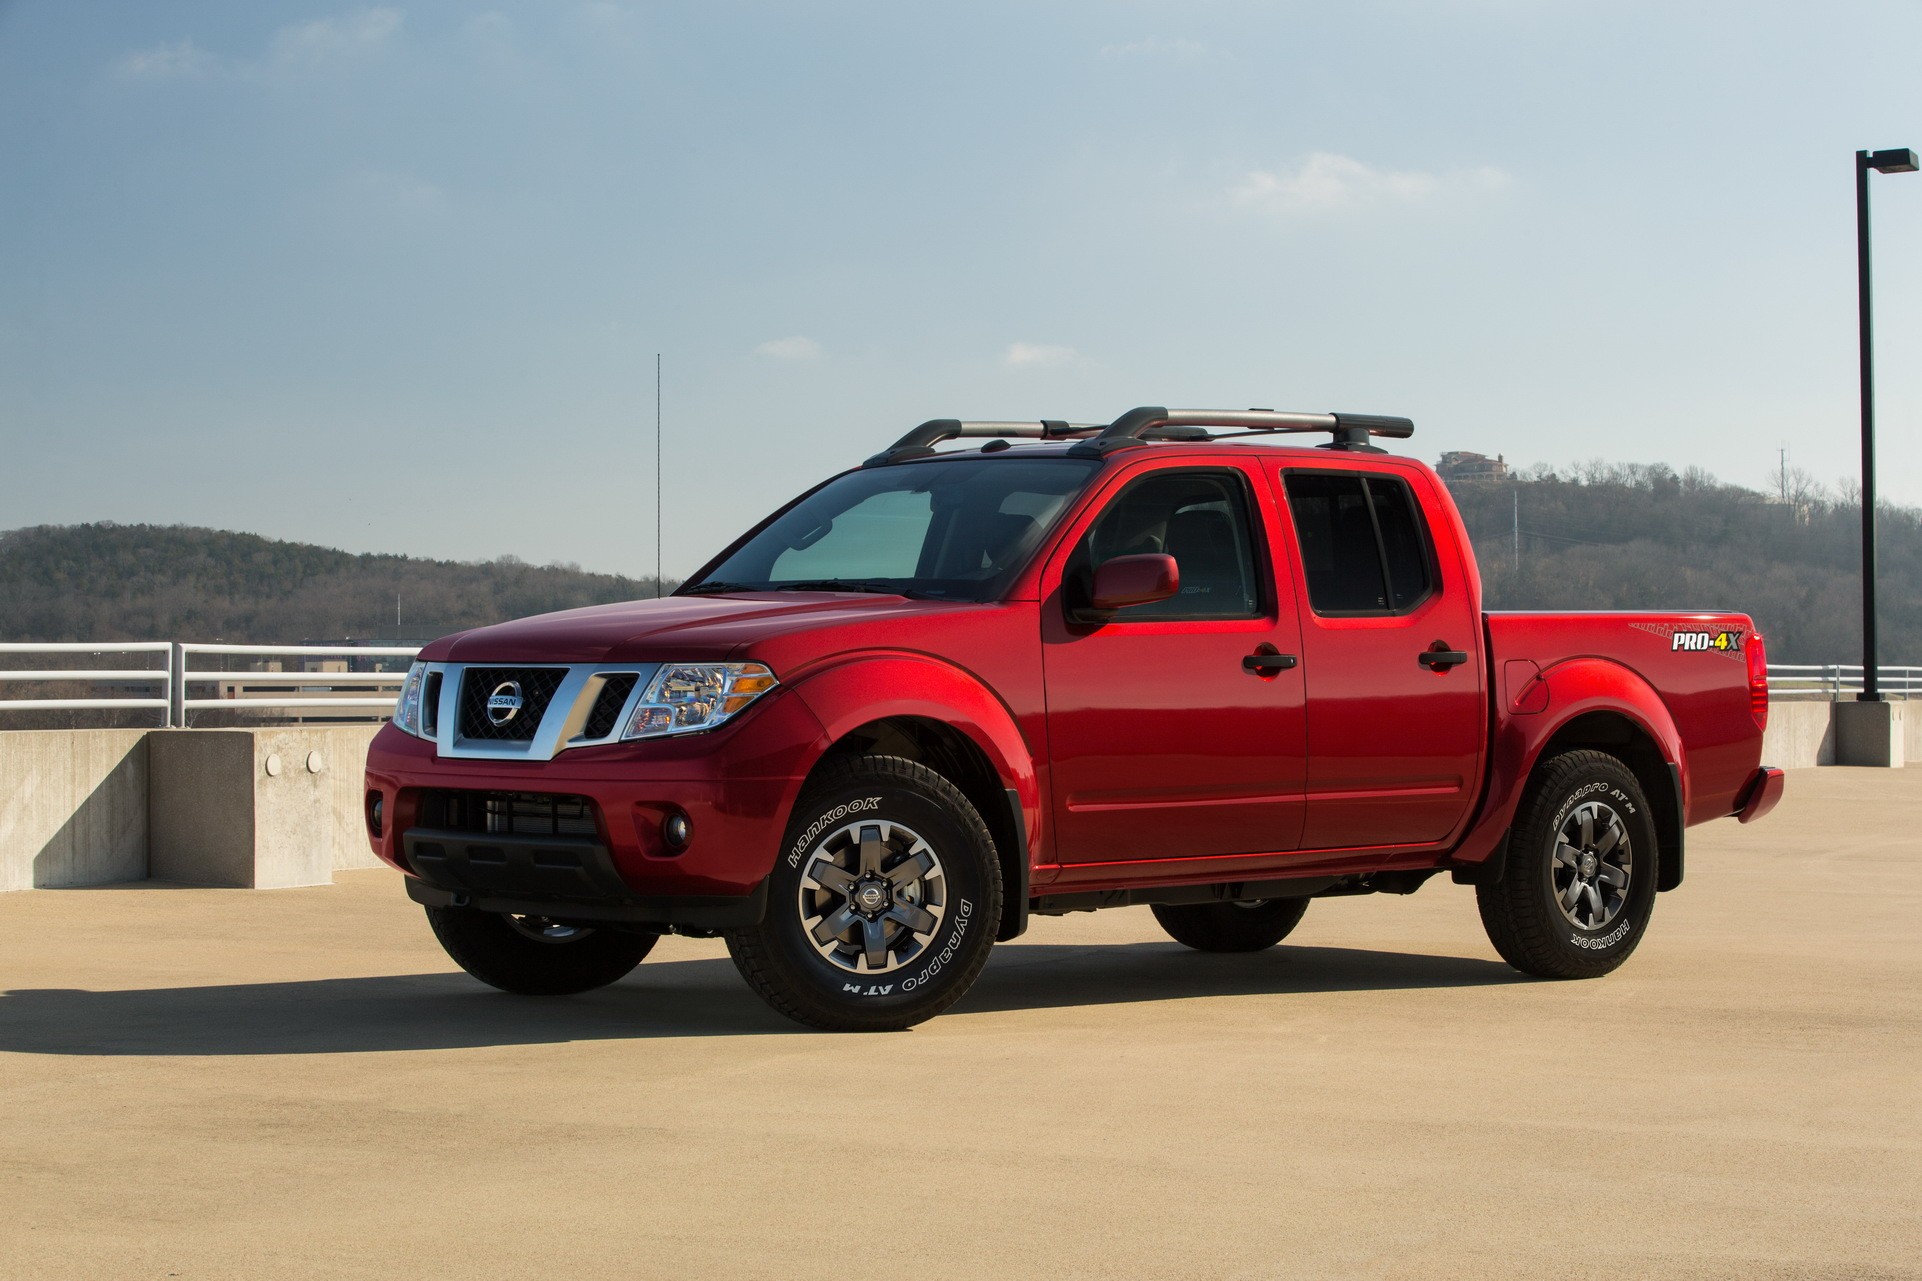 Contoh Sk Pptk 2021 Nissan Frontier - IMAGESEE